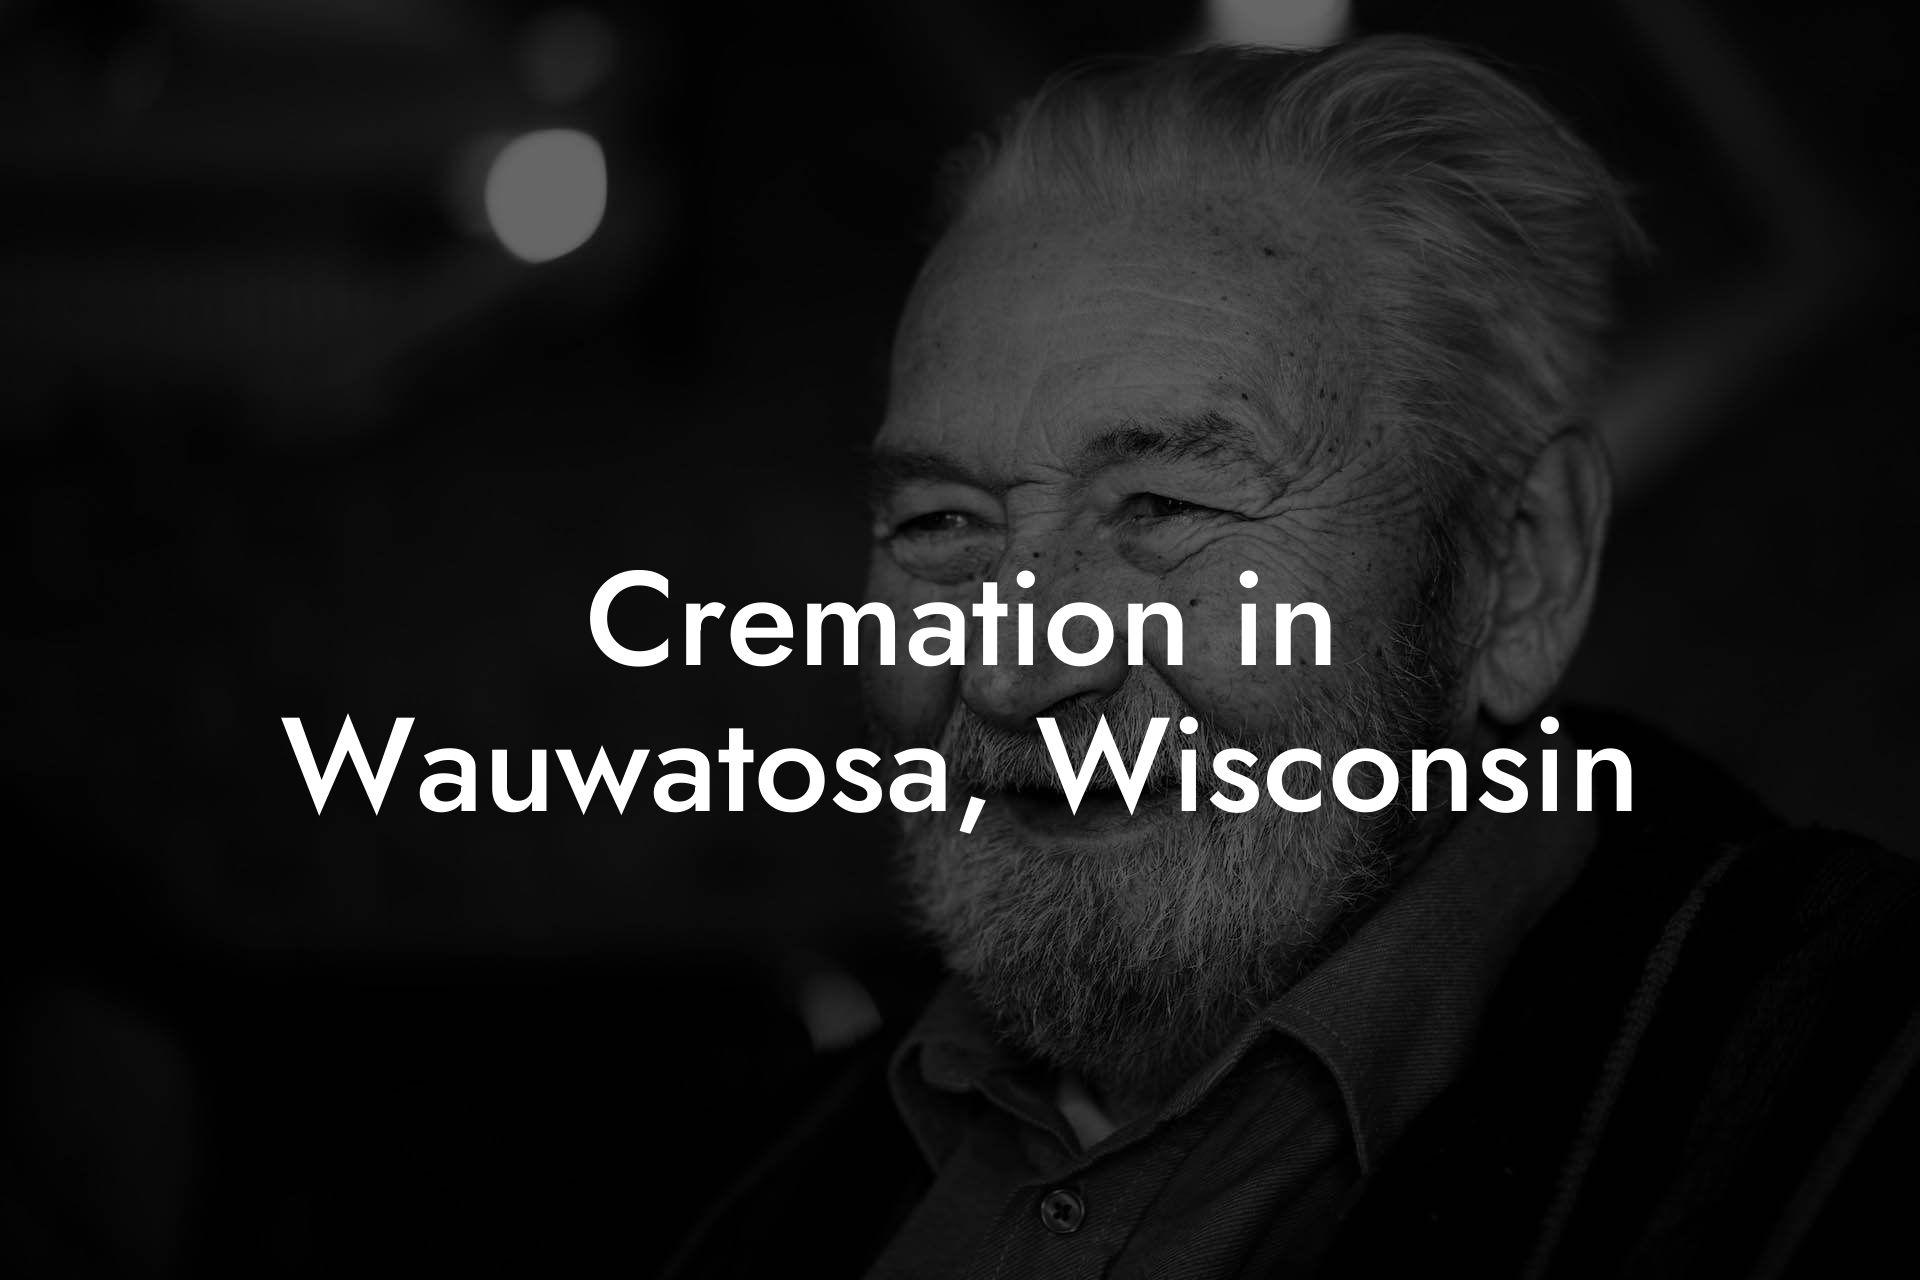 Cremation in Wauwatosa, Wisconsin